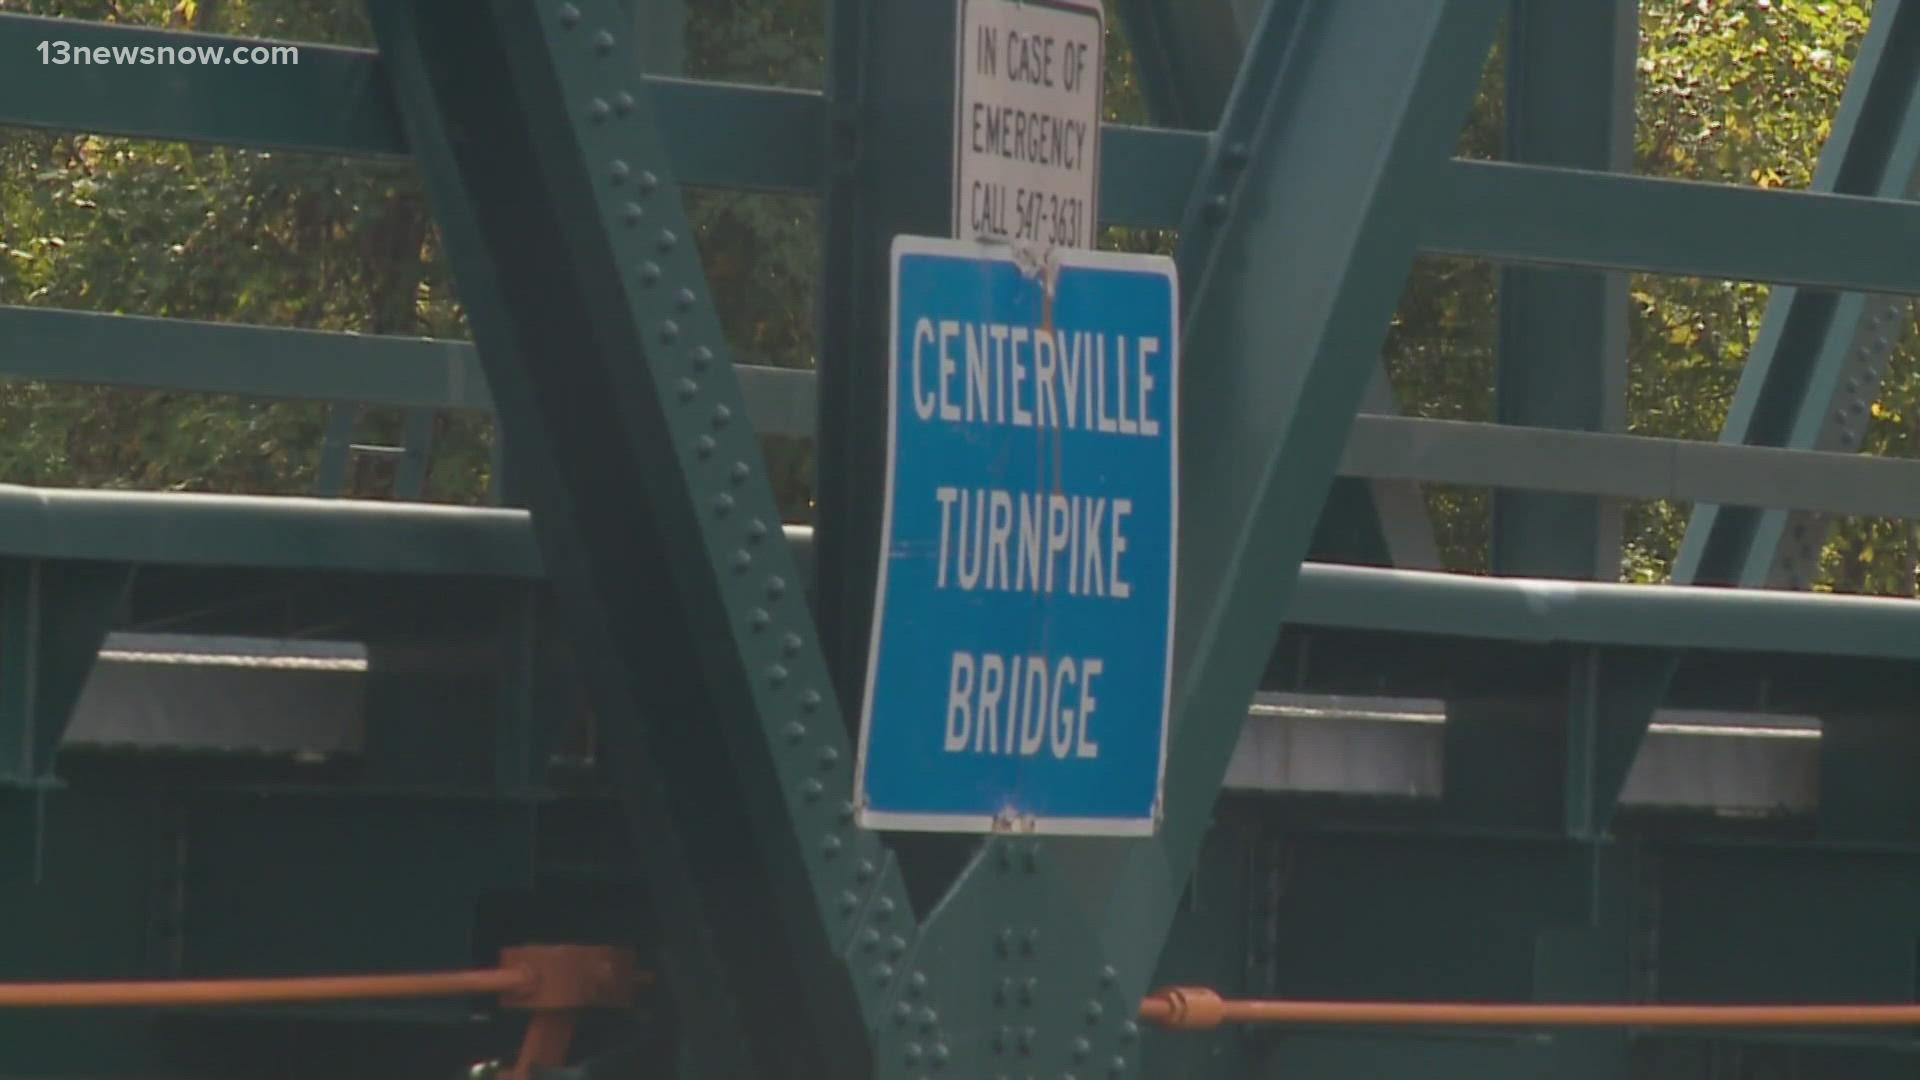 After continuous issues and delays, there is now a replacement plan in the works for the Centerville Turnpike Bridge.